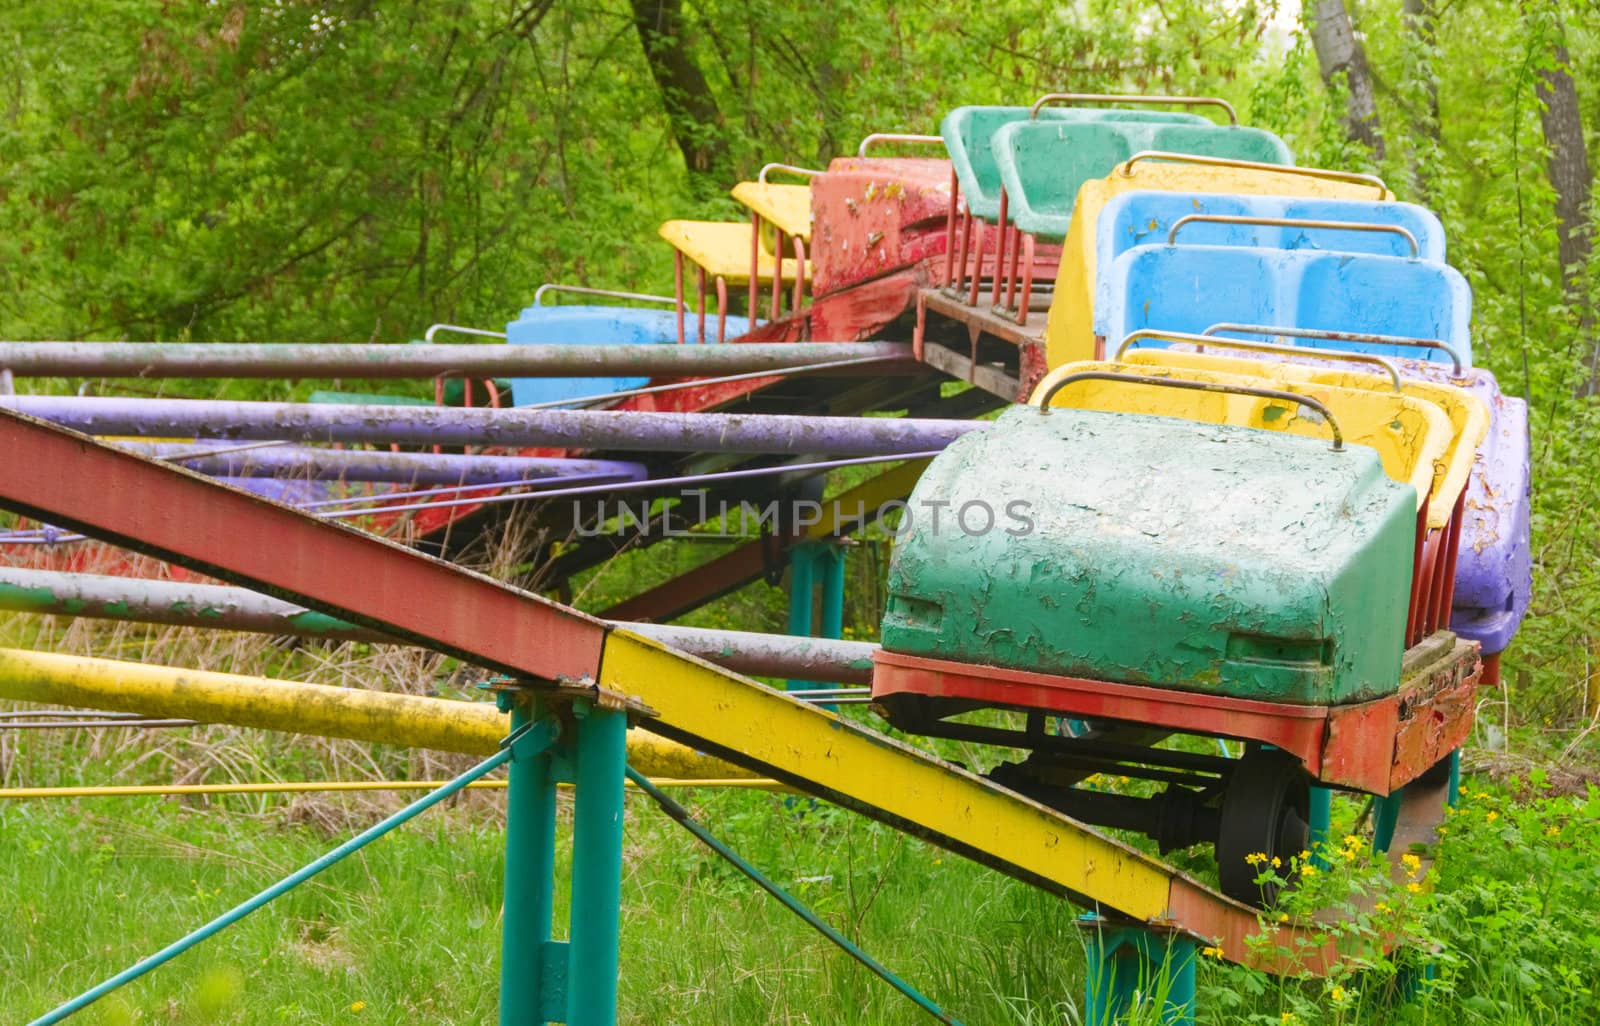 Abandoned attraction in old decayed amusement park